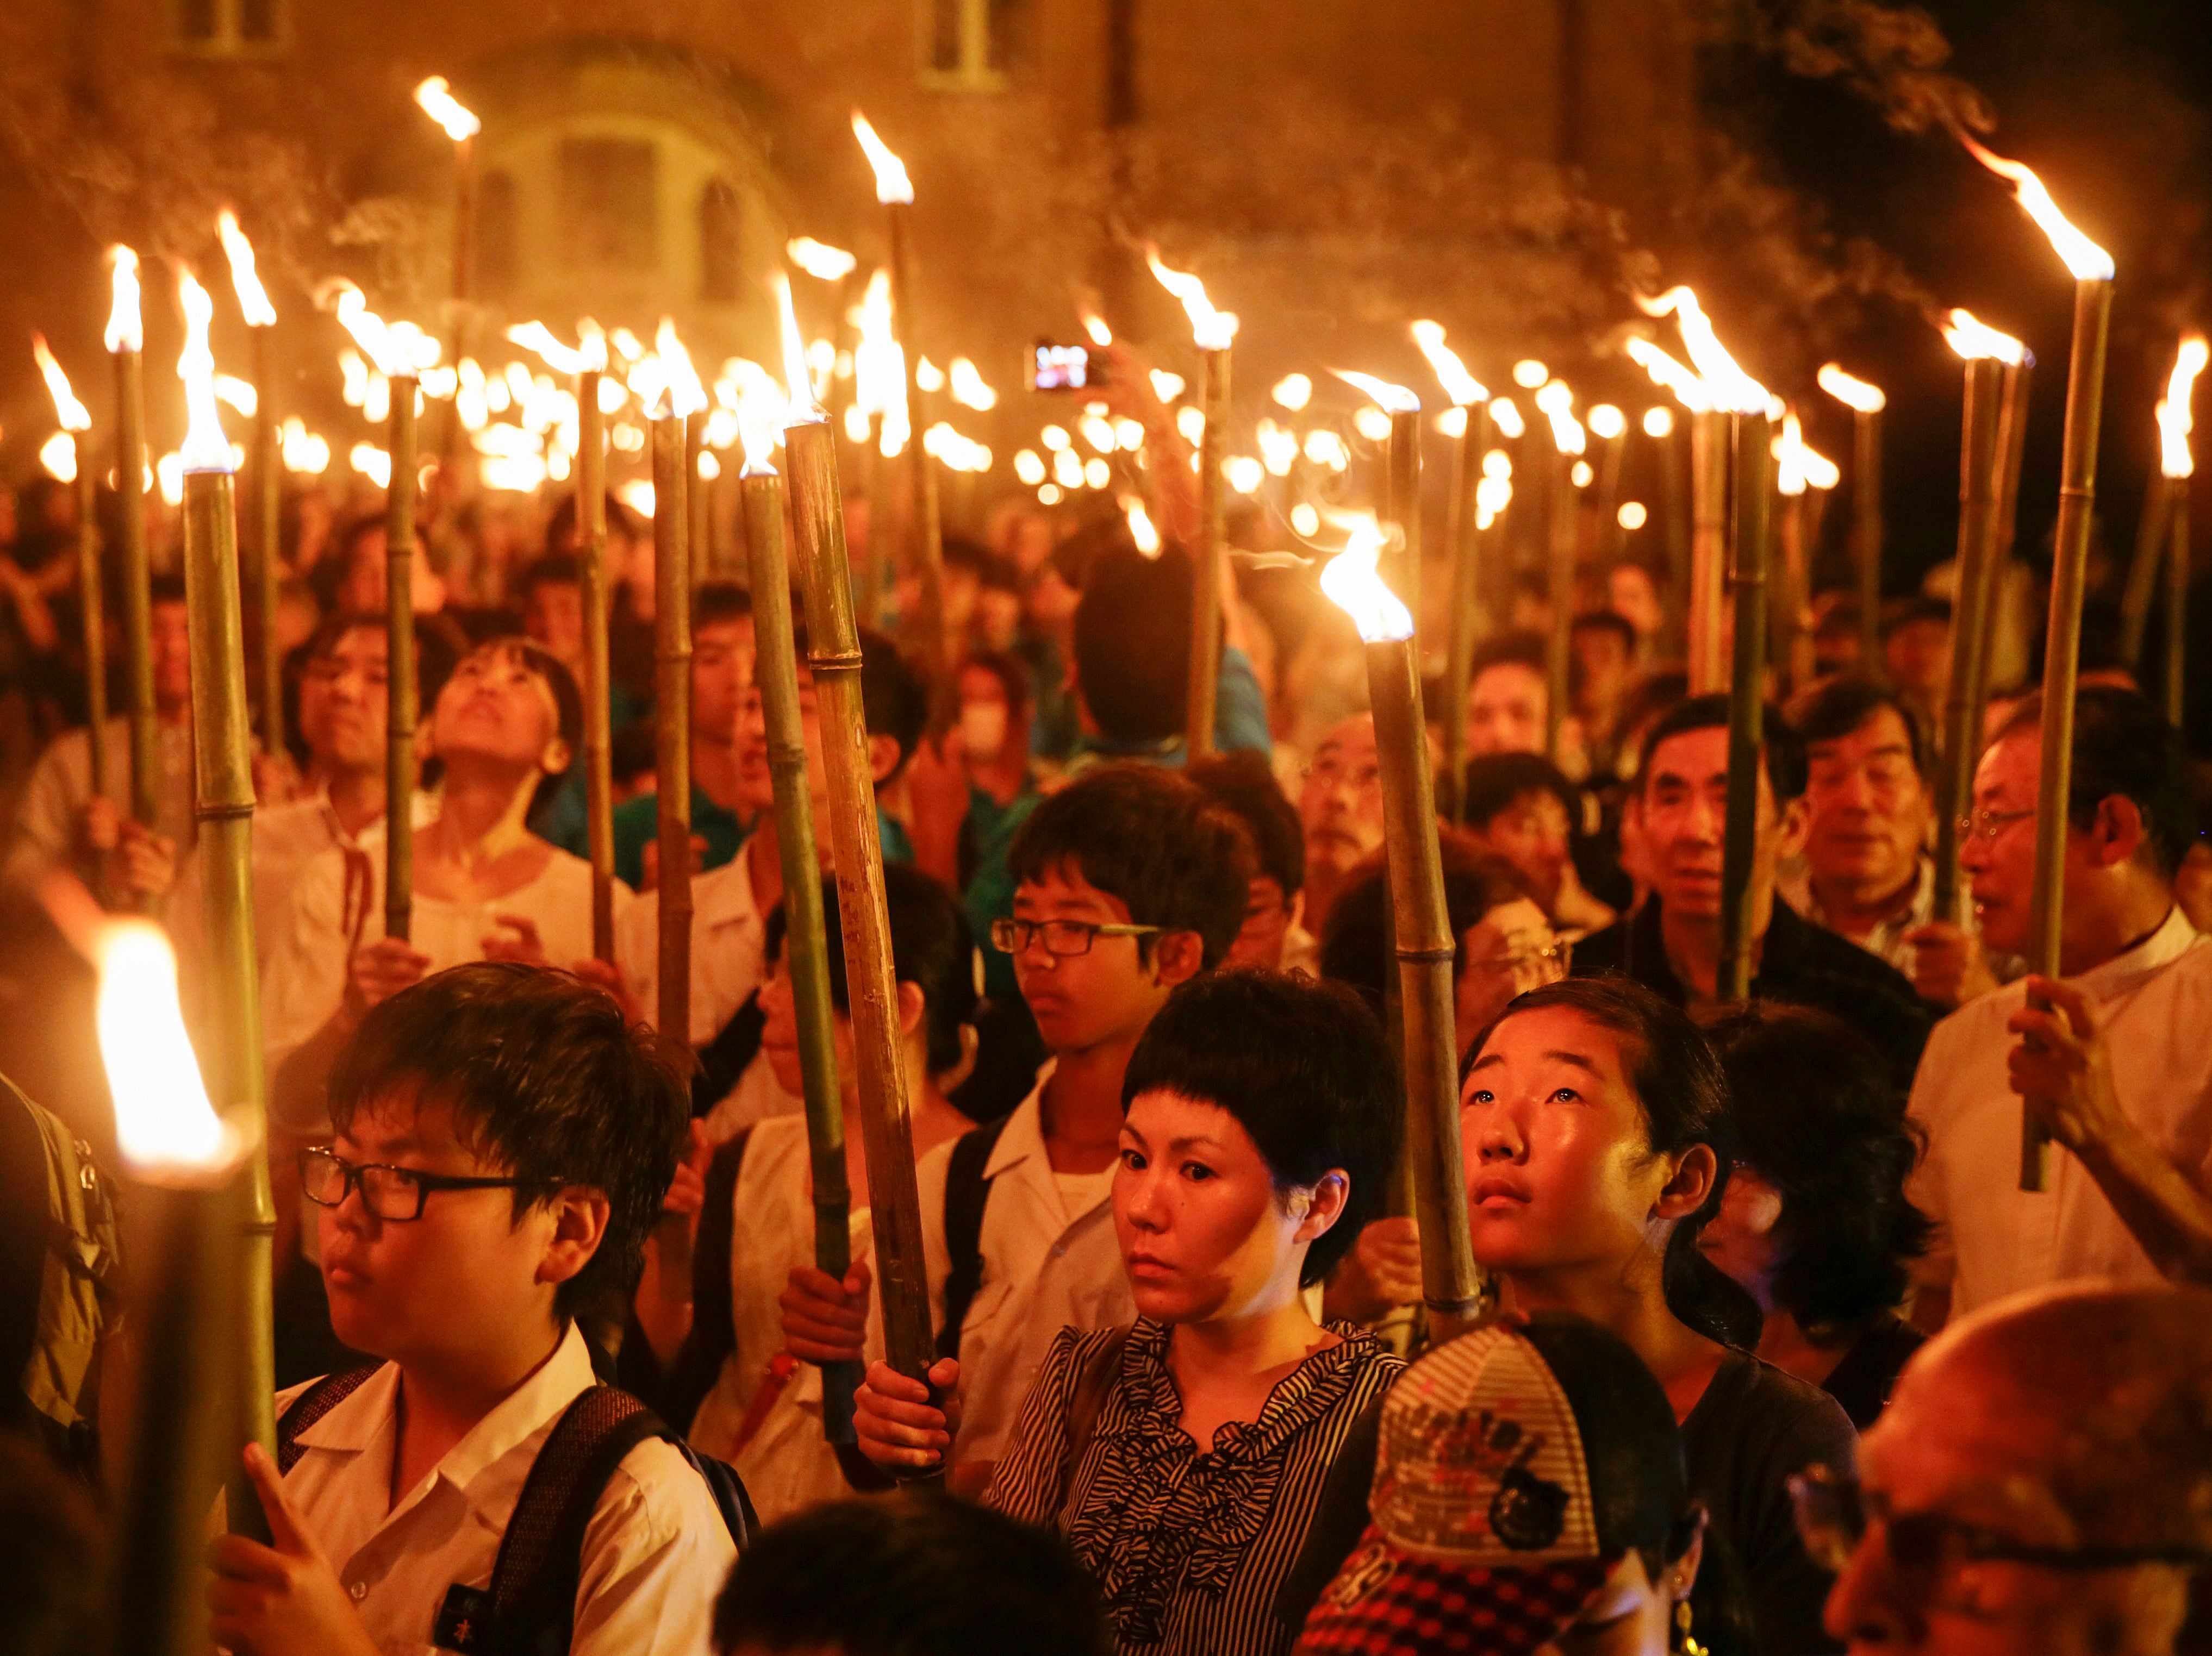 Catholics taking part in a torchlight procession from Urakami Cathedral to the Nagasaki Peace Park in south-western Japan on Sunday to remember the victims of the atomic bombing of Nagasaki on Aug 9, 1945.